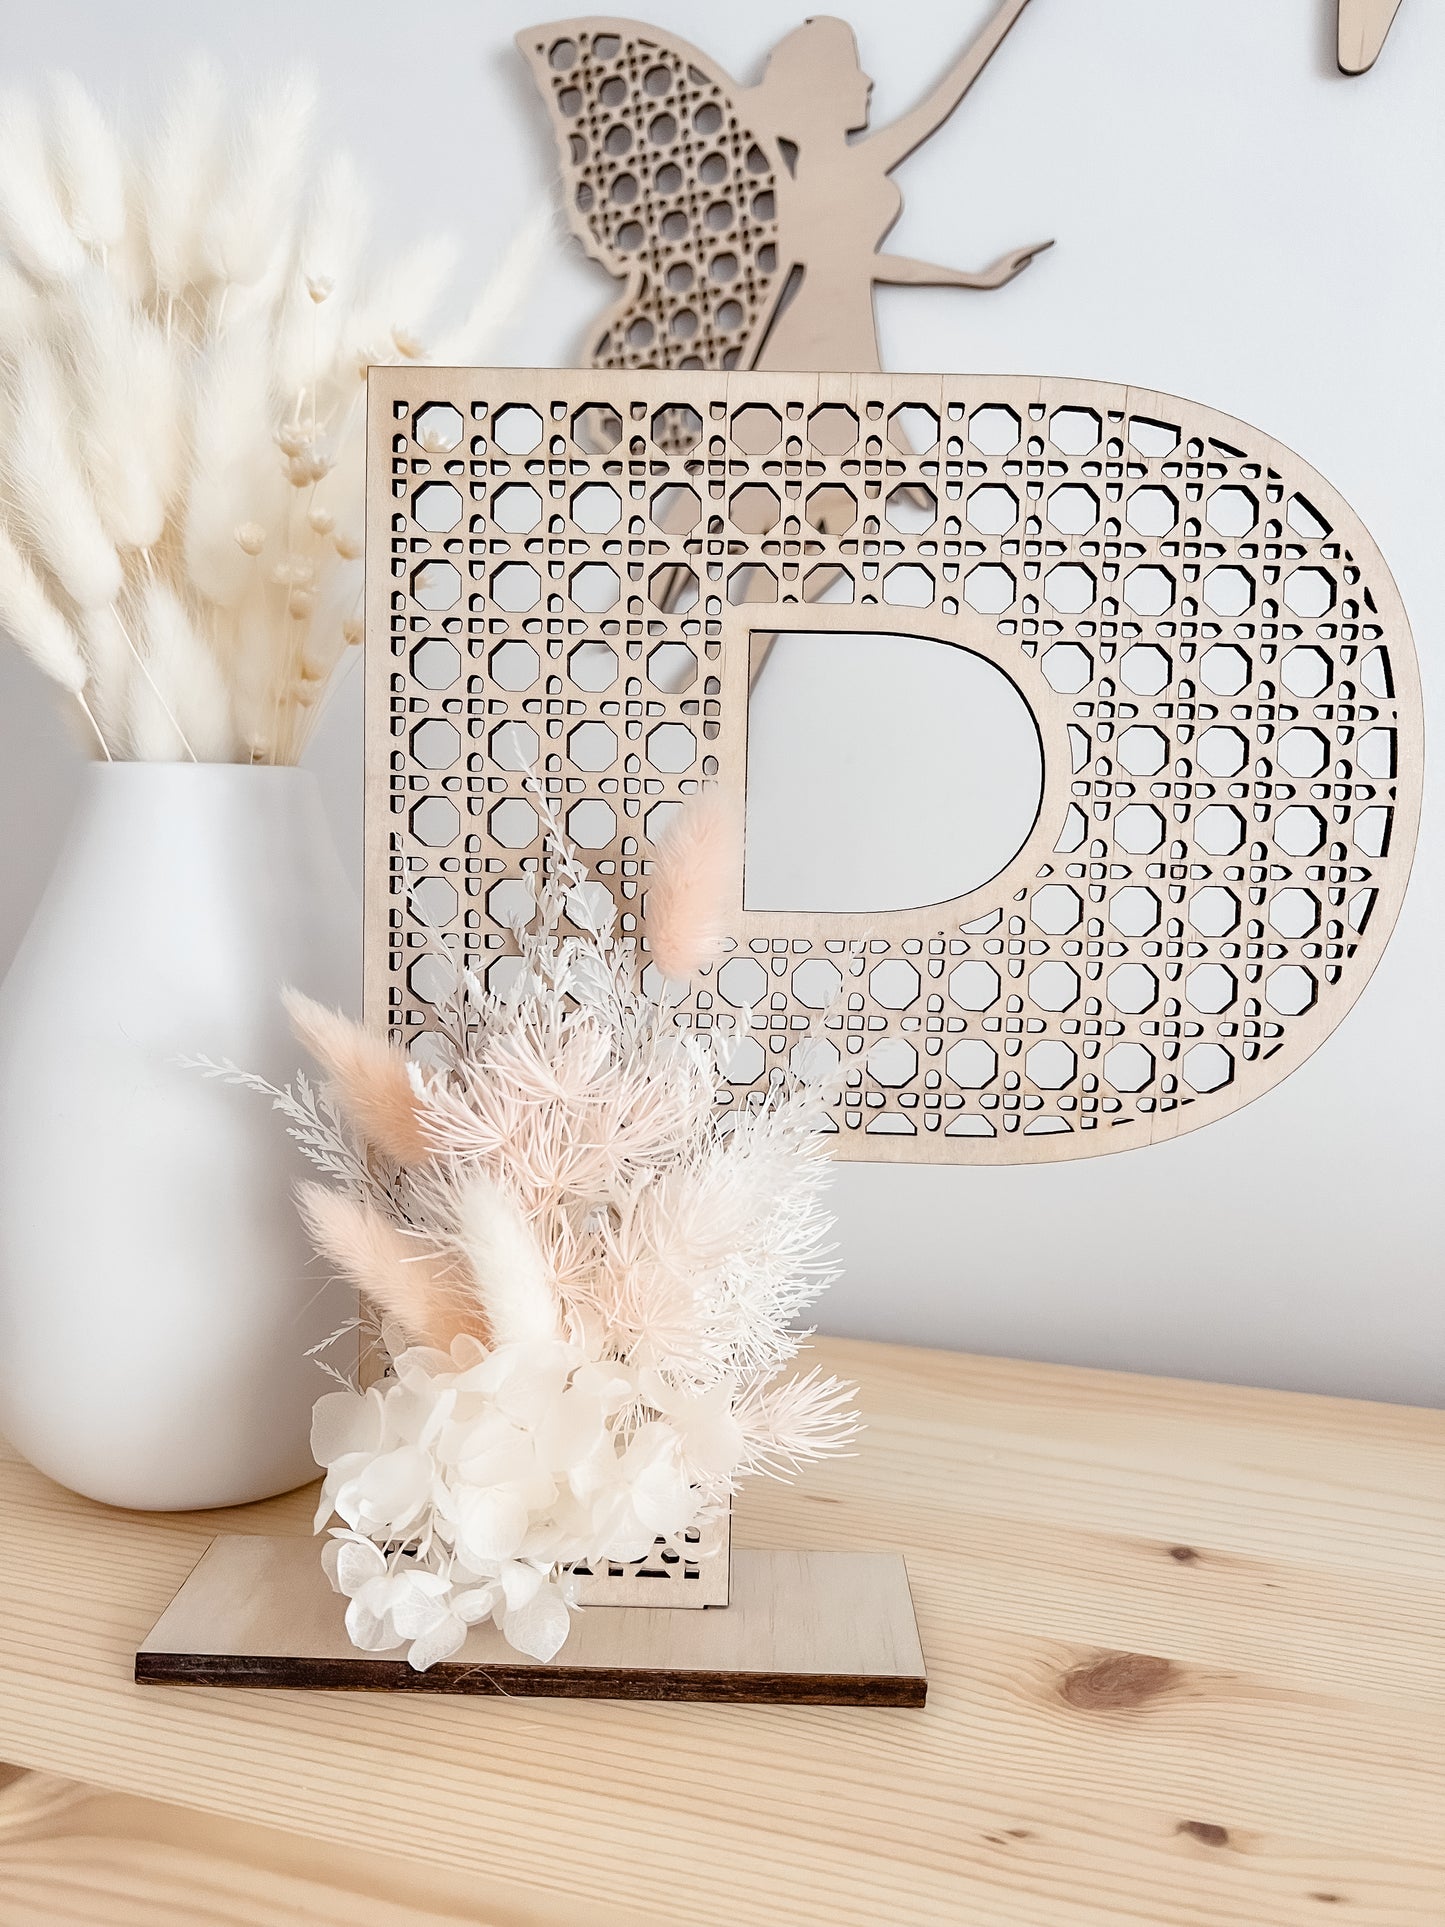 Wooden Rattan Look Letter with dried floral arrangement